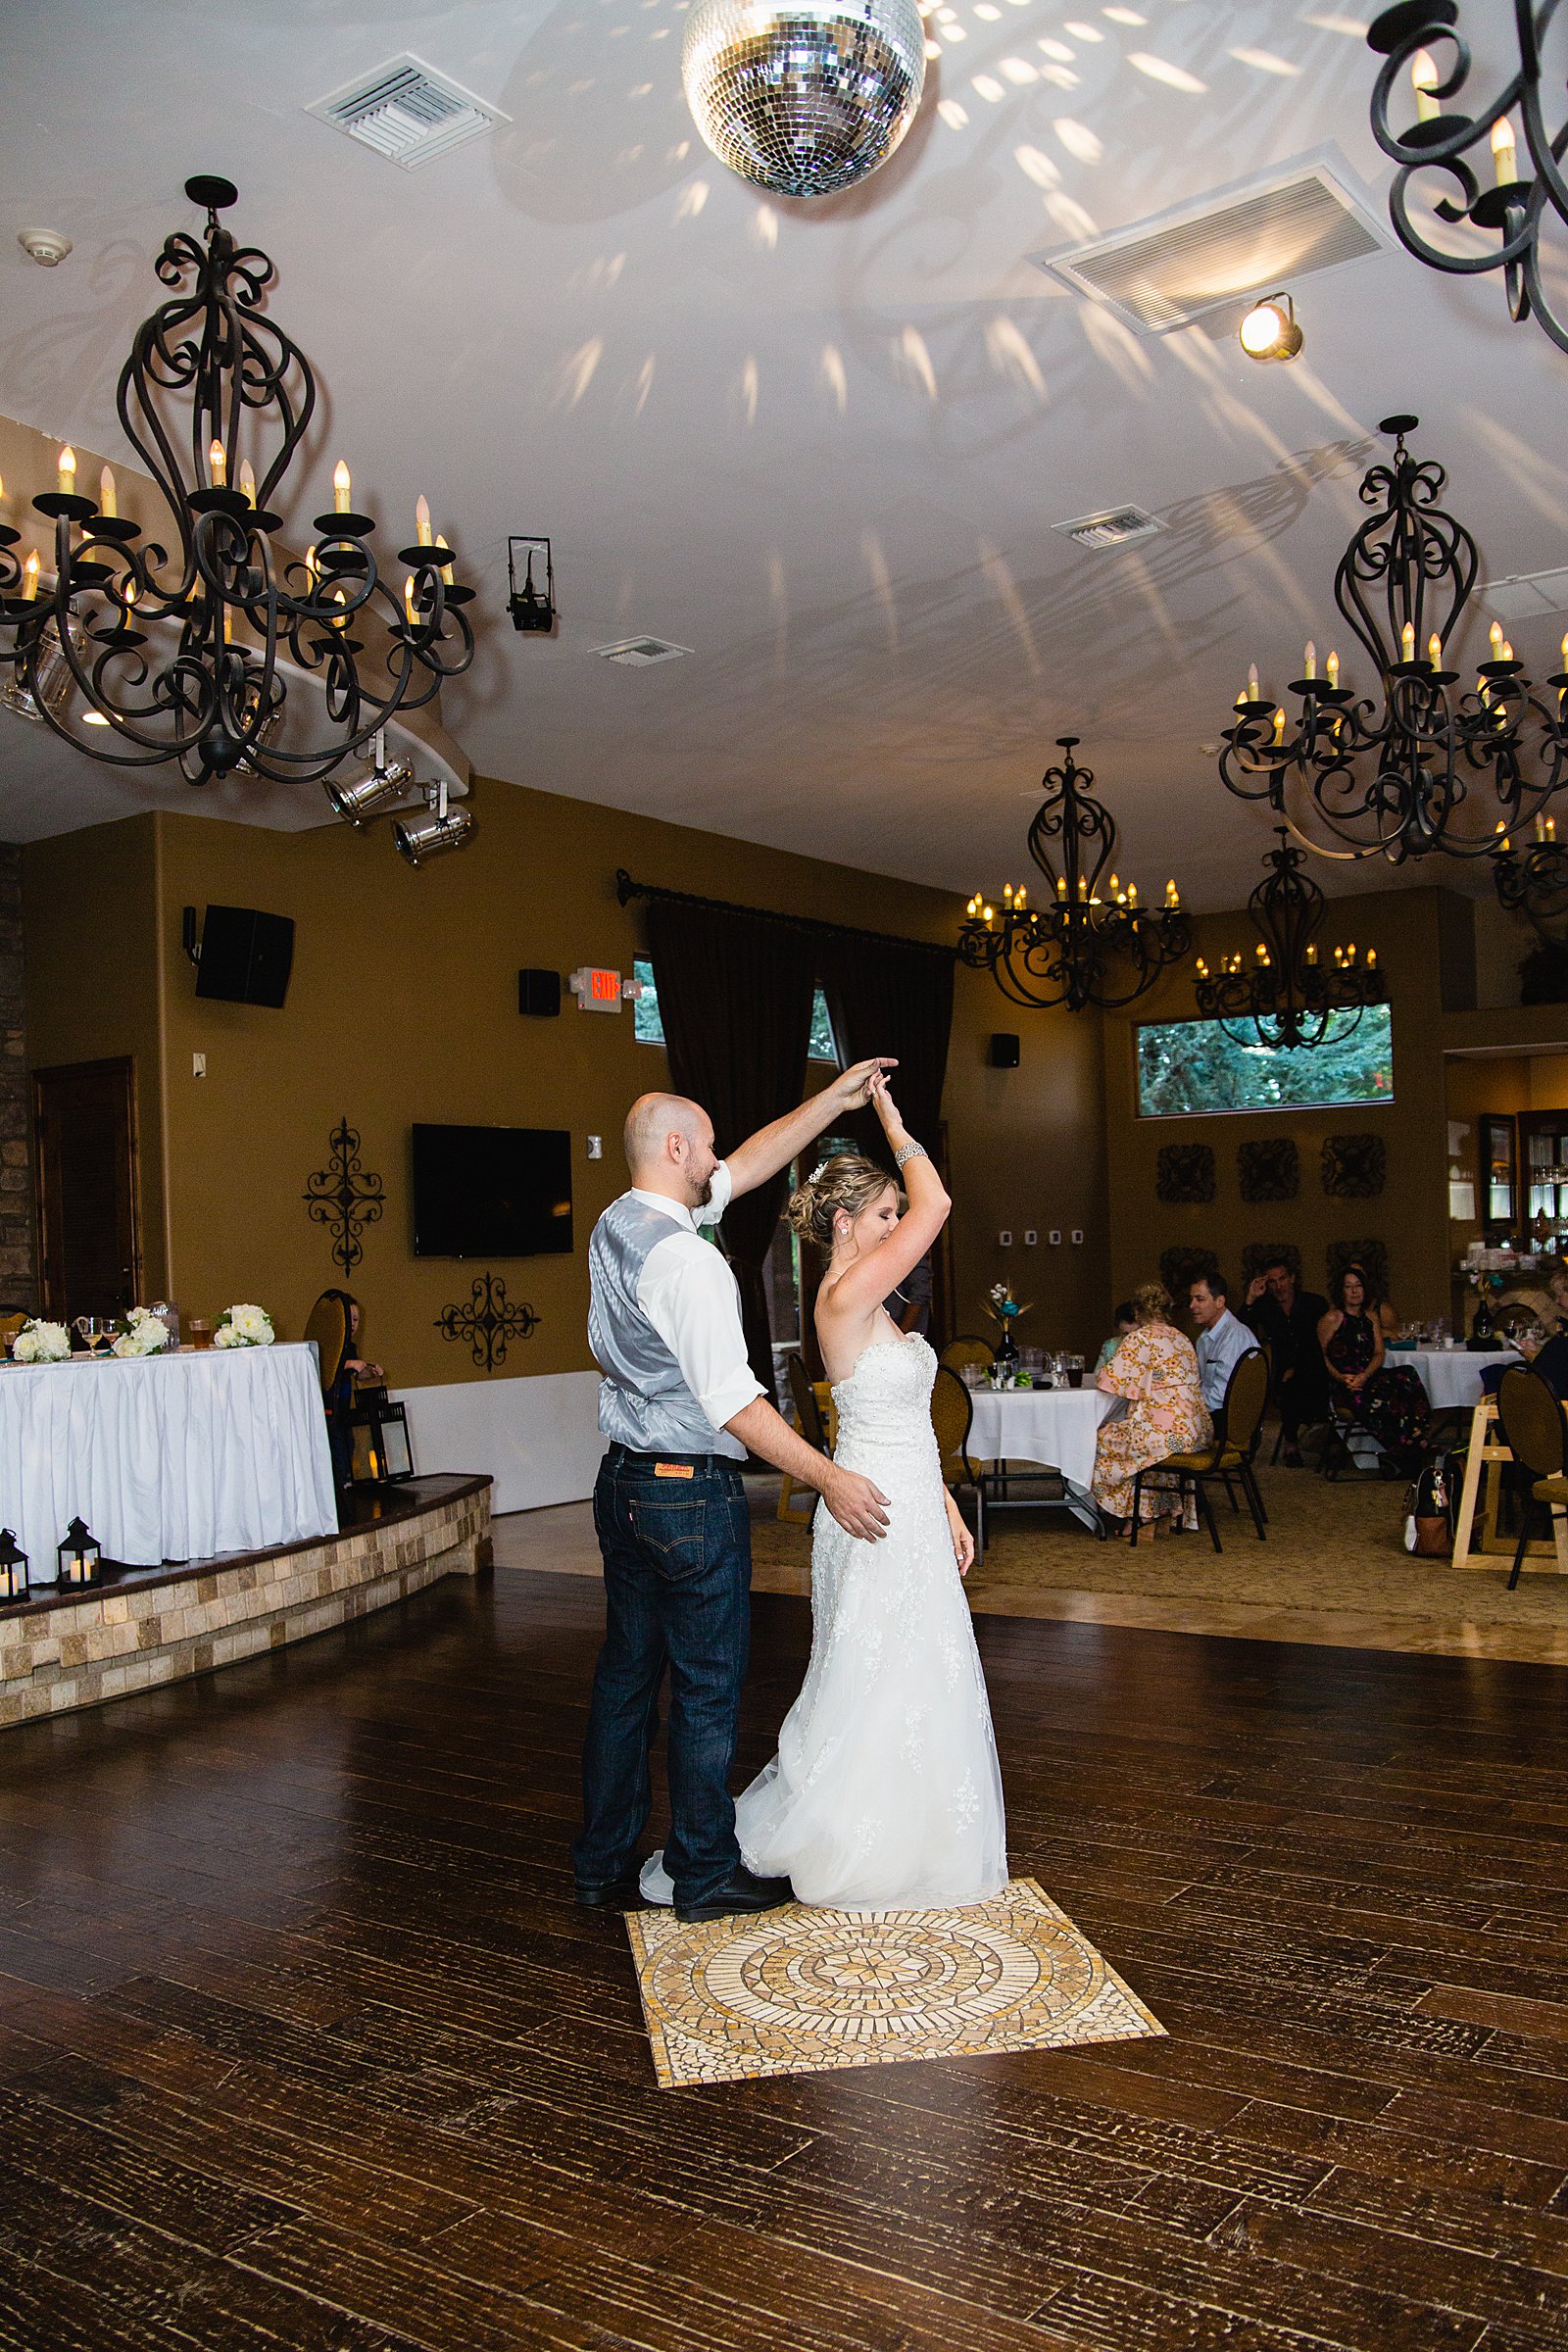 Bride and Groom sharing first dance at their The Windmill House wedding reception by Arizona wedding photographer PMA Photography.